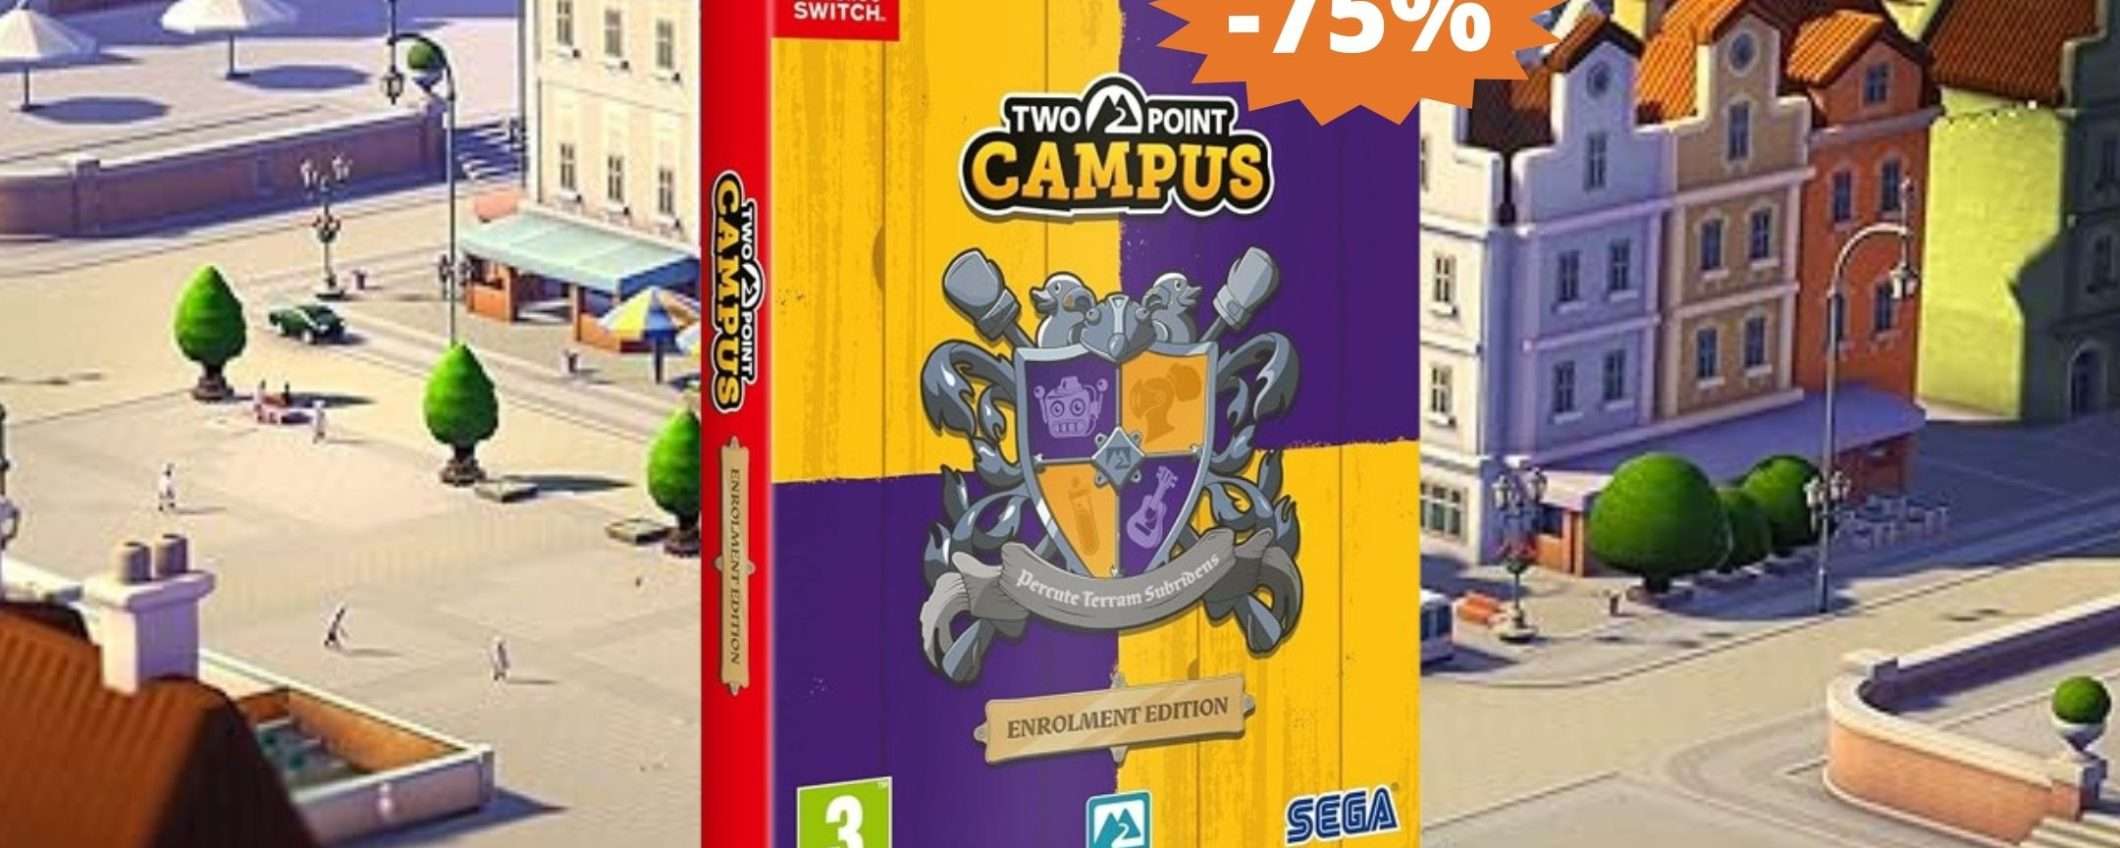 Two Point Campus Nintendo Switch: sconto FOLLE del 75%